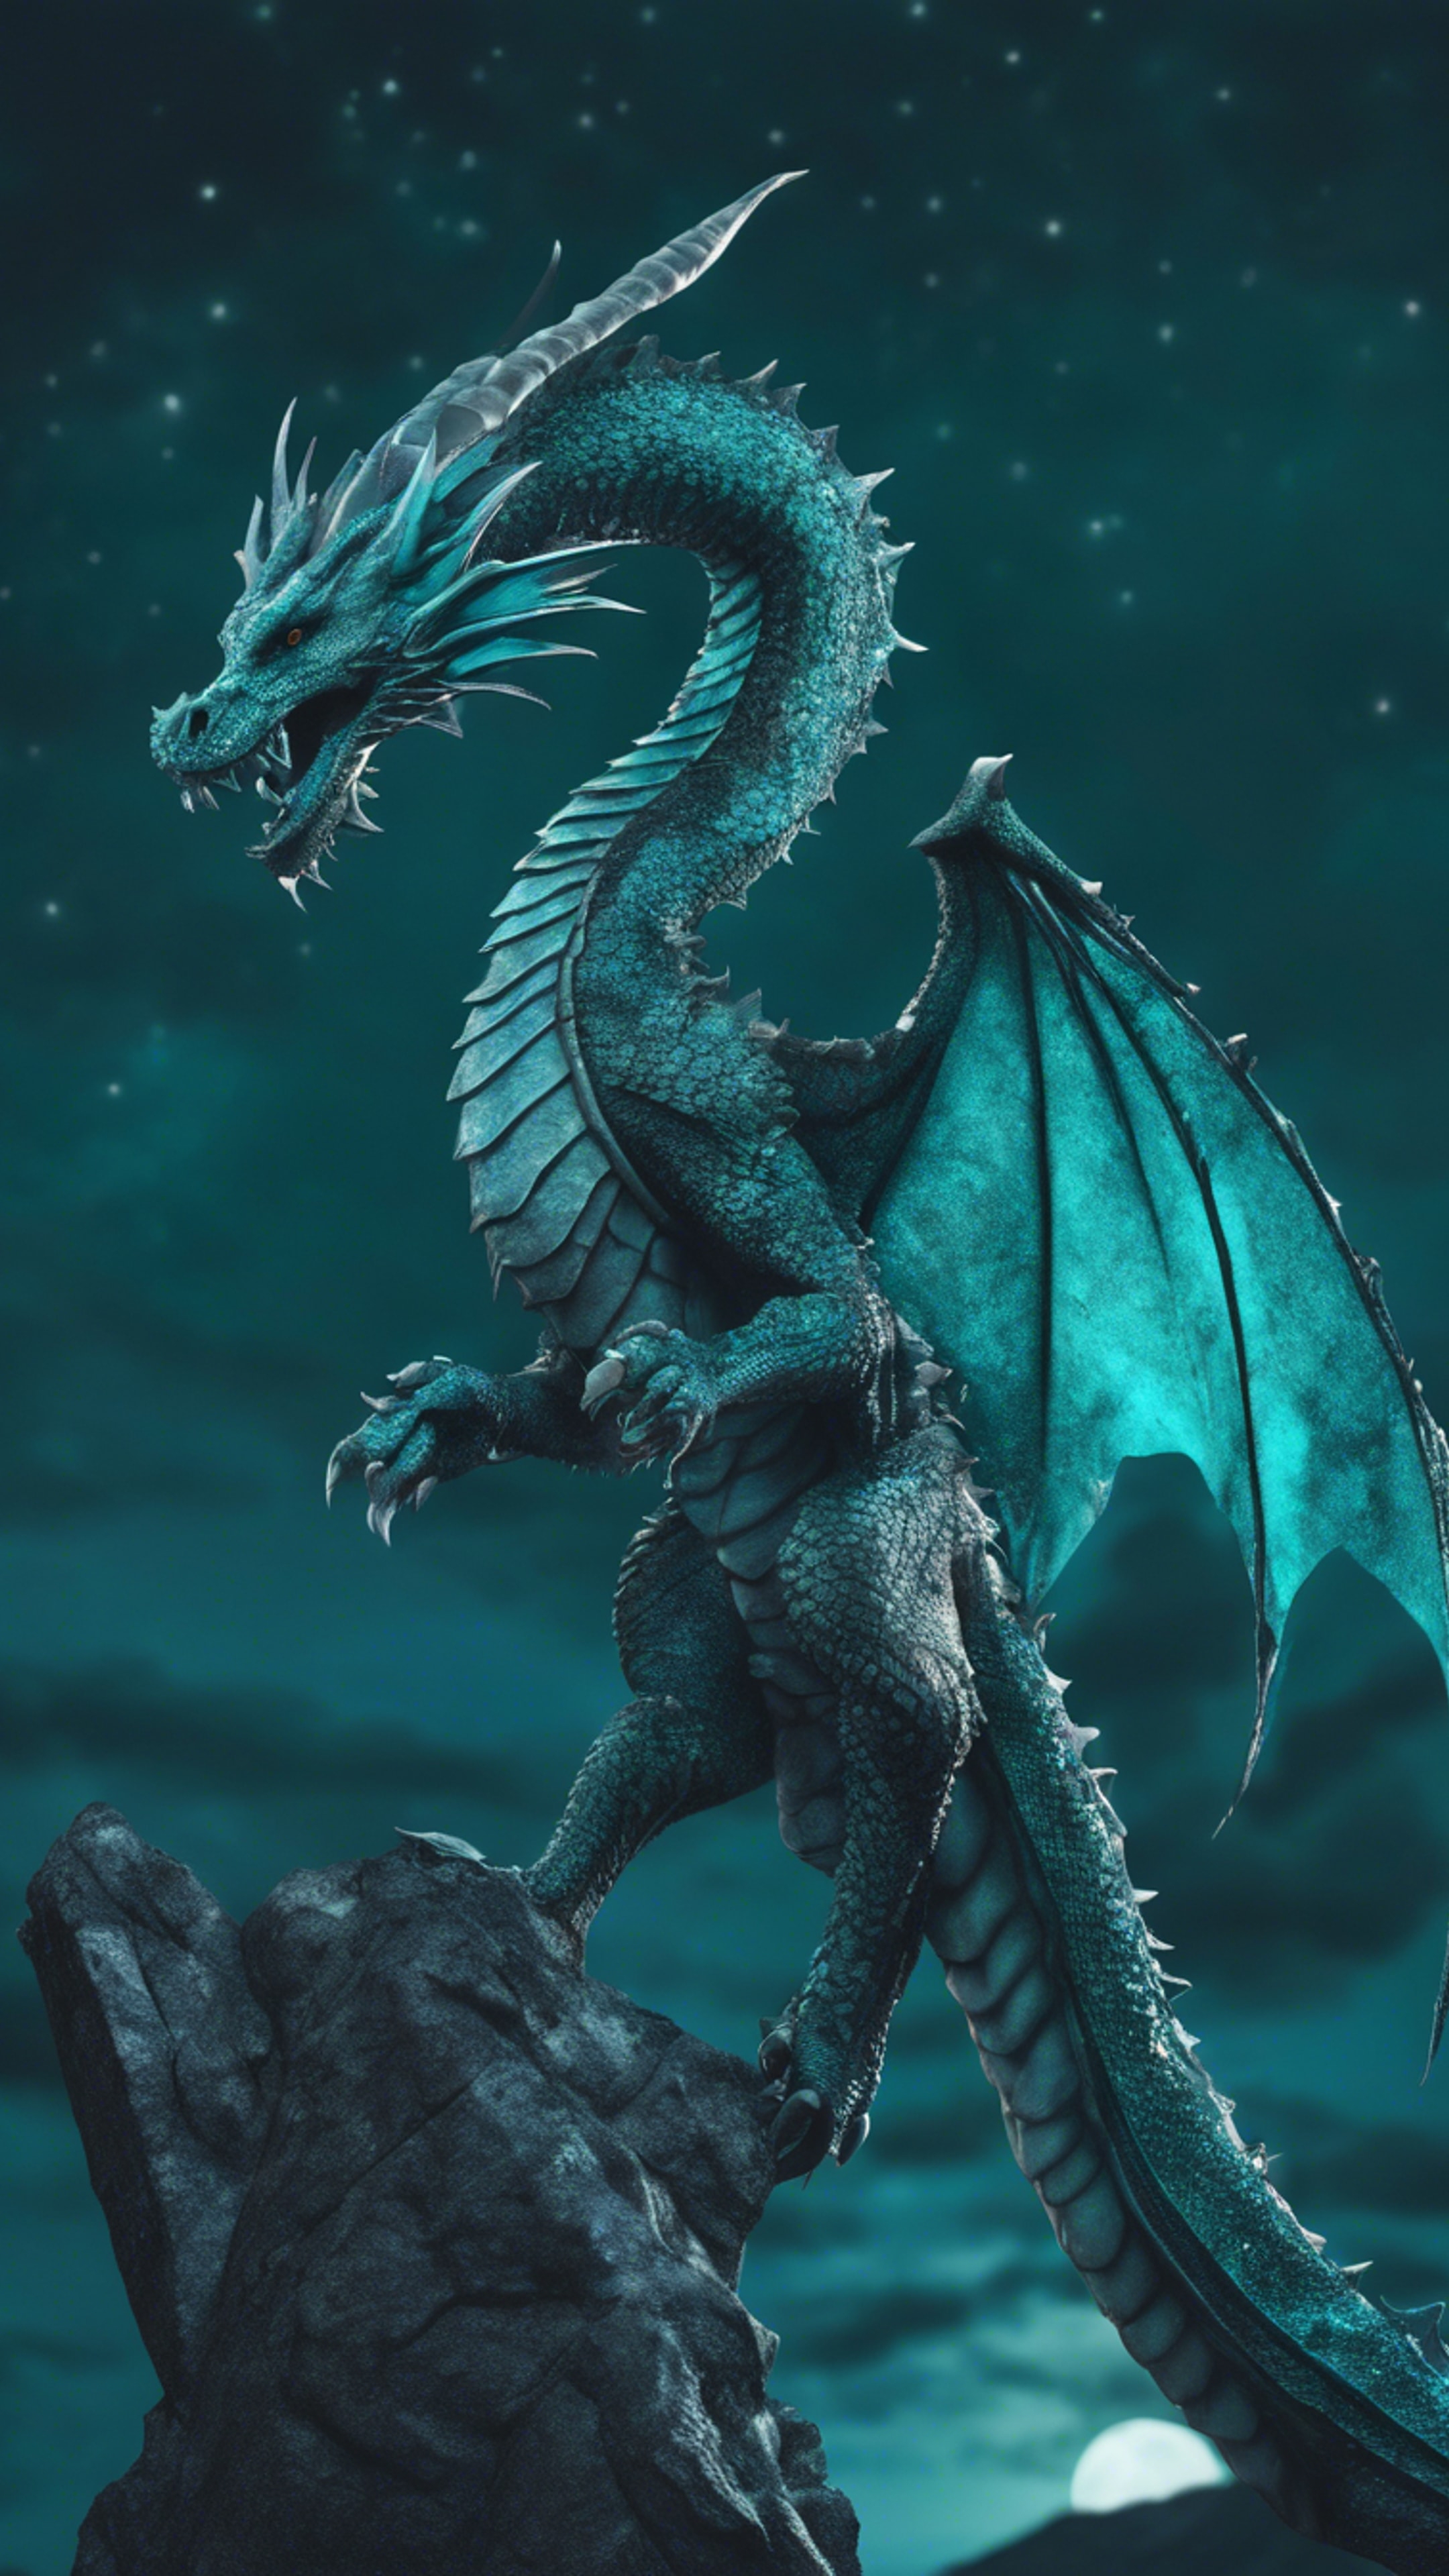 A serpentine Gothic dragon perched on a tall mountain, its teal scales shimmering under the moonlight. Обои[91ef634c137e4b1f8ab5]